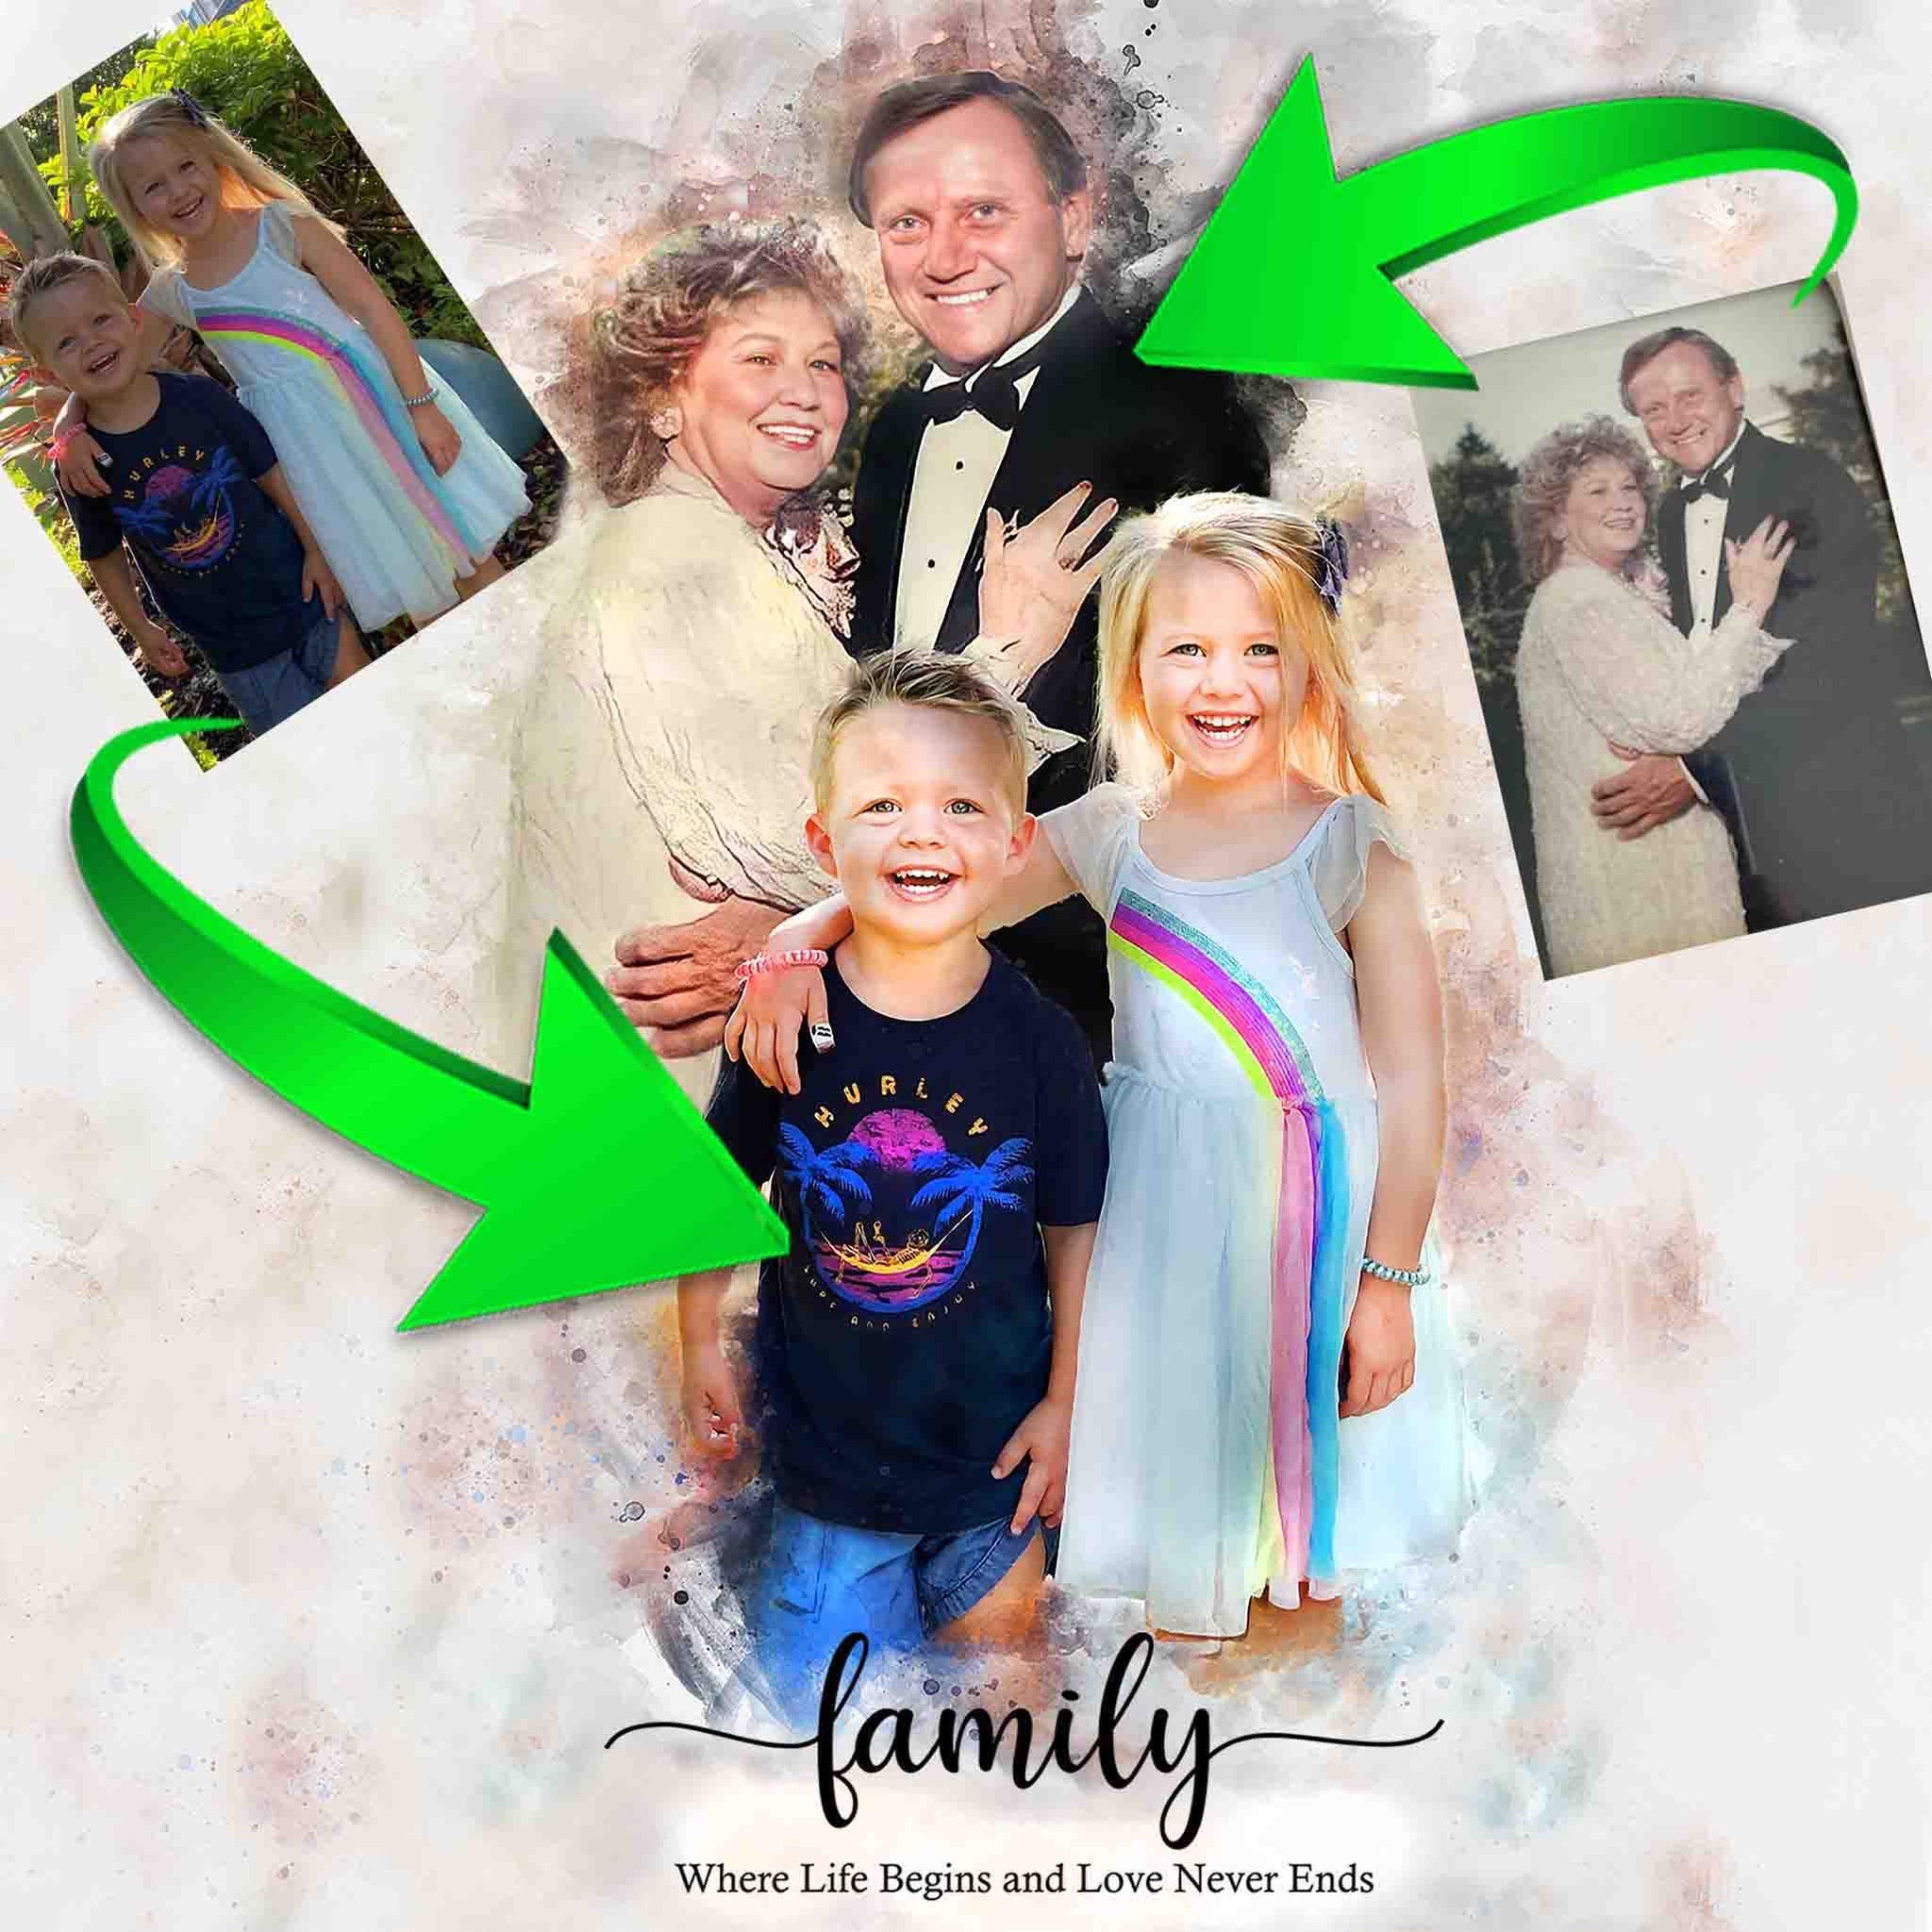 Pictures with Passed Family Members, Custom Picture with Deceased Loved One in Background, Add People into a Picture - FromPicToArt